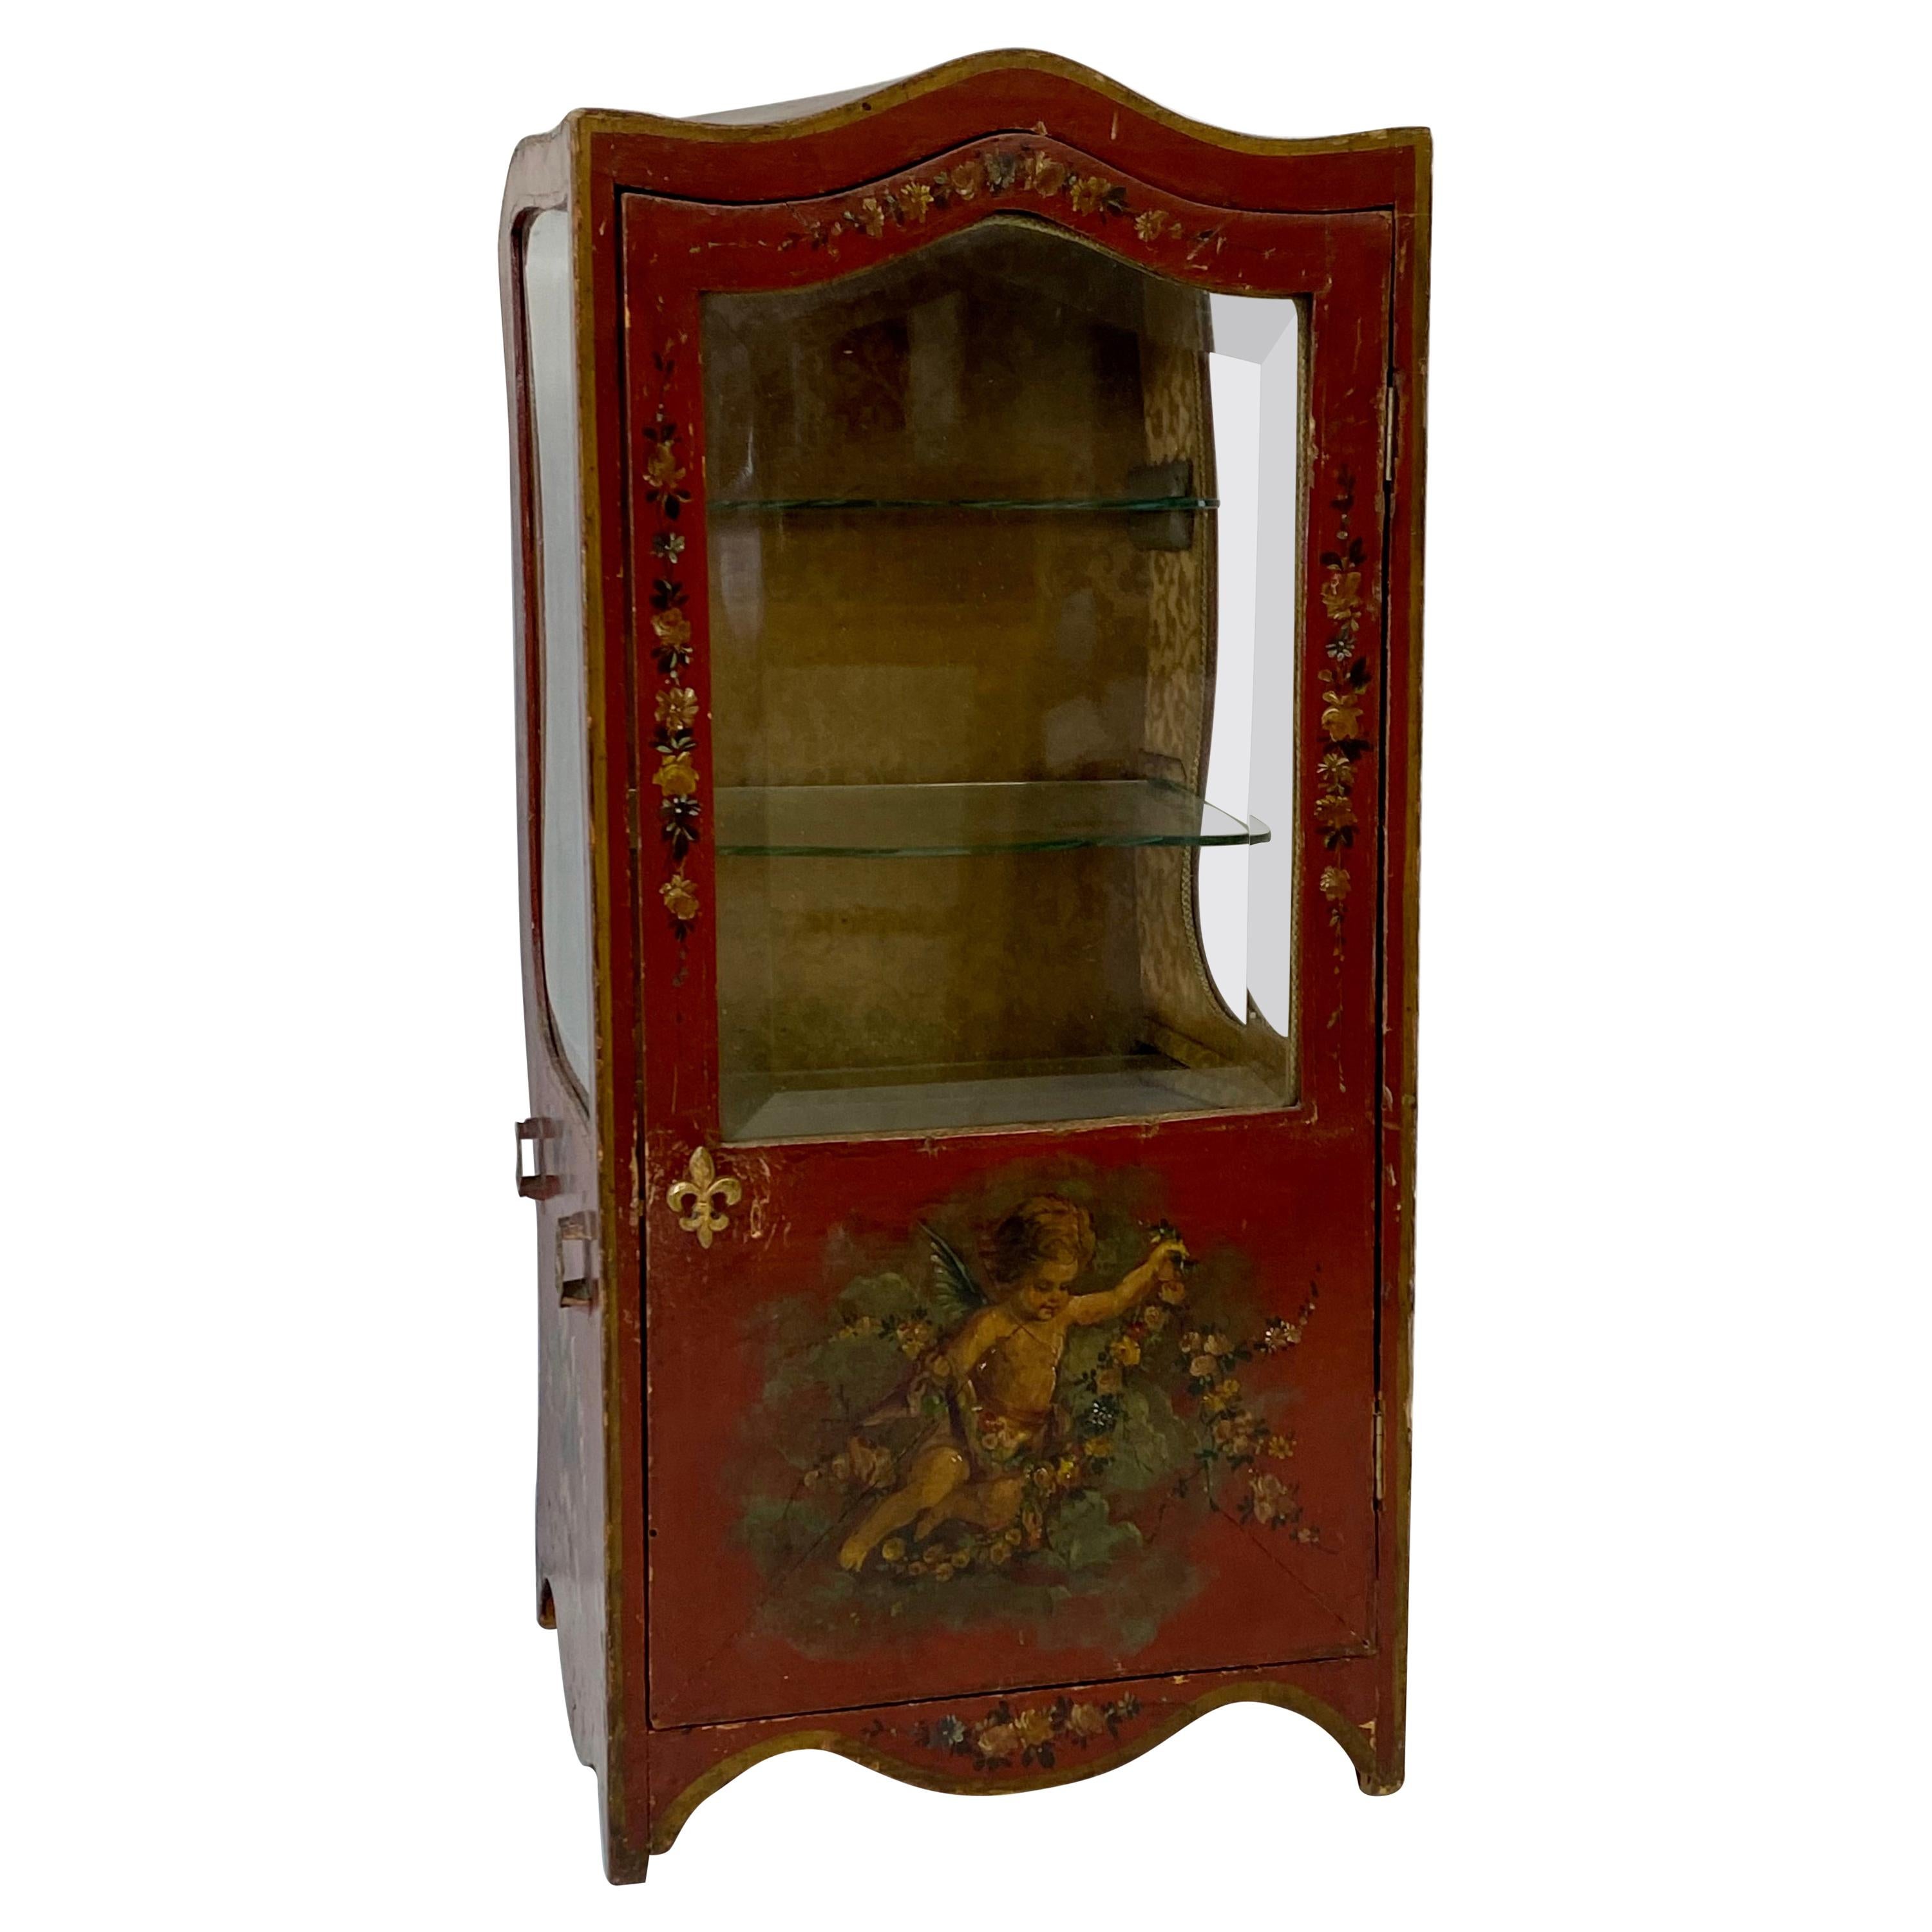 Late 19th to Early 20th Century Sedan Chair Miniature Table Top Display Cabinet